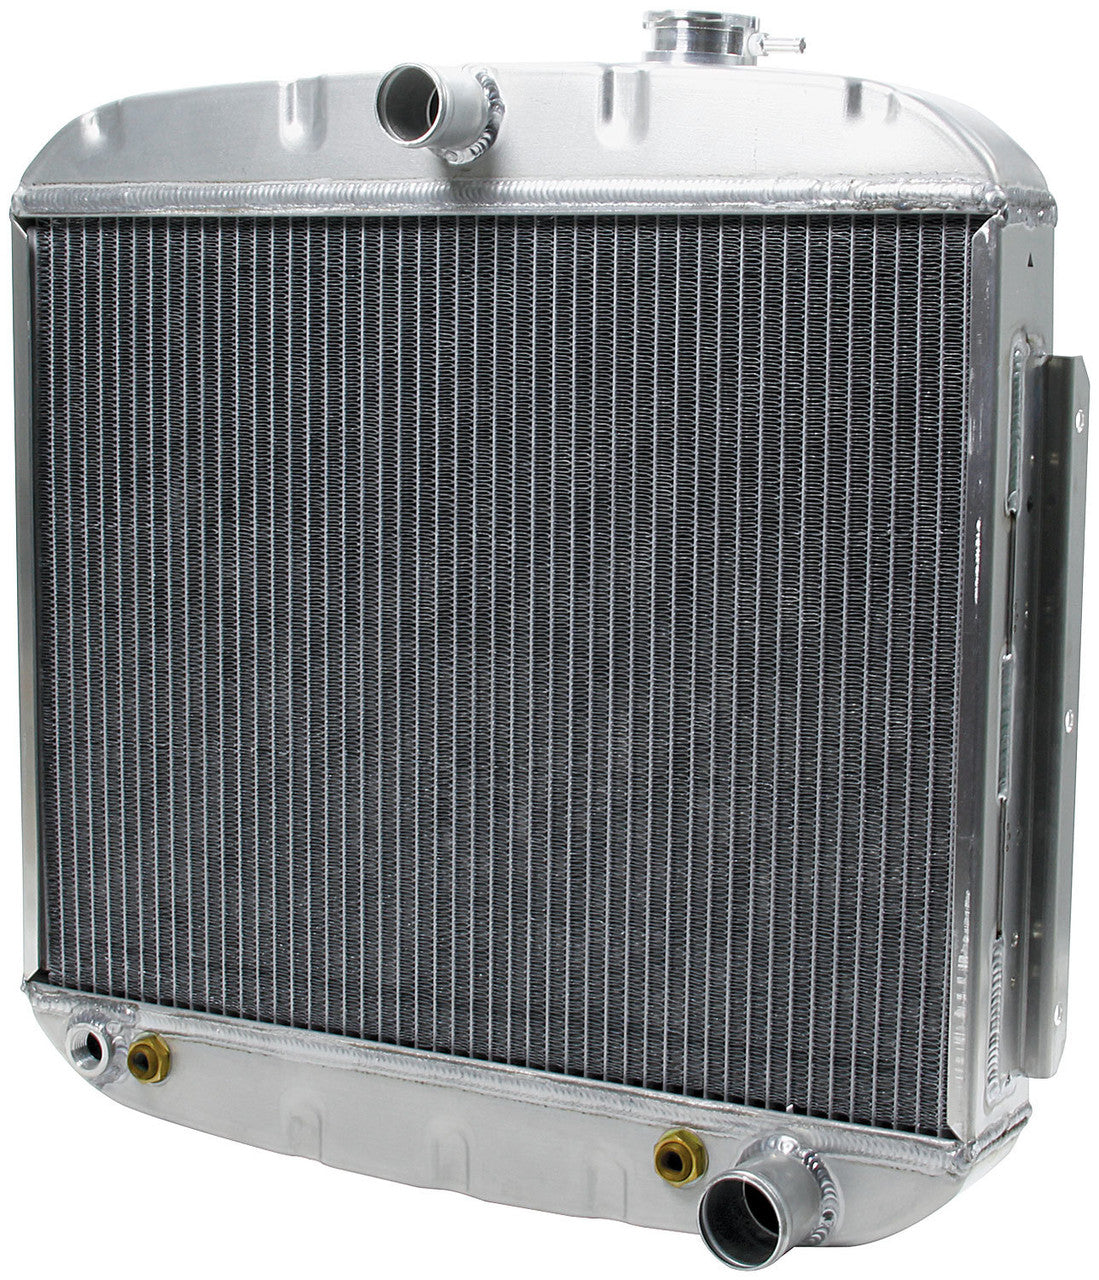 SRP RADIATOR ALLOY HI PERF, CHEVY 1955-57 ALLOY REPLACEMENT, INCLUDE TRANS OIL COOLER.